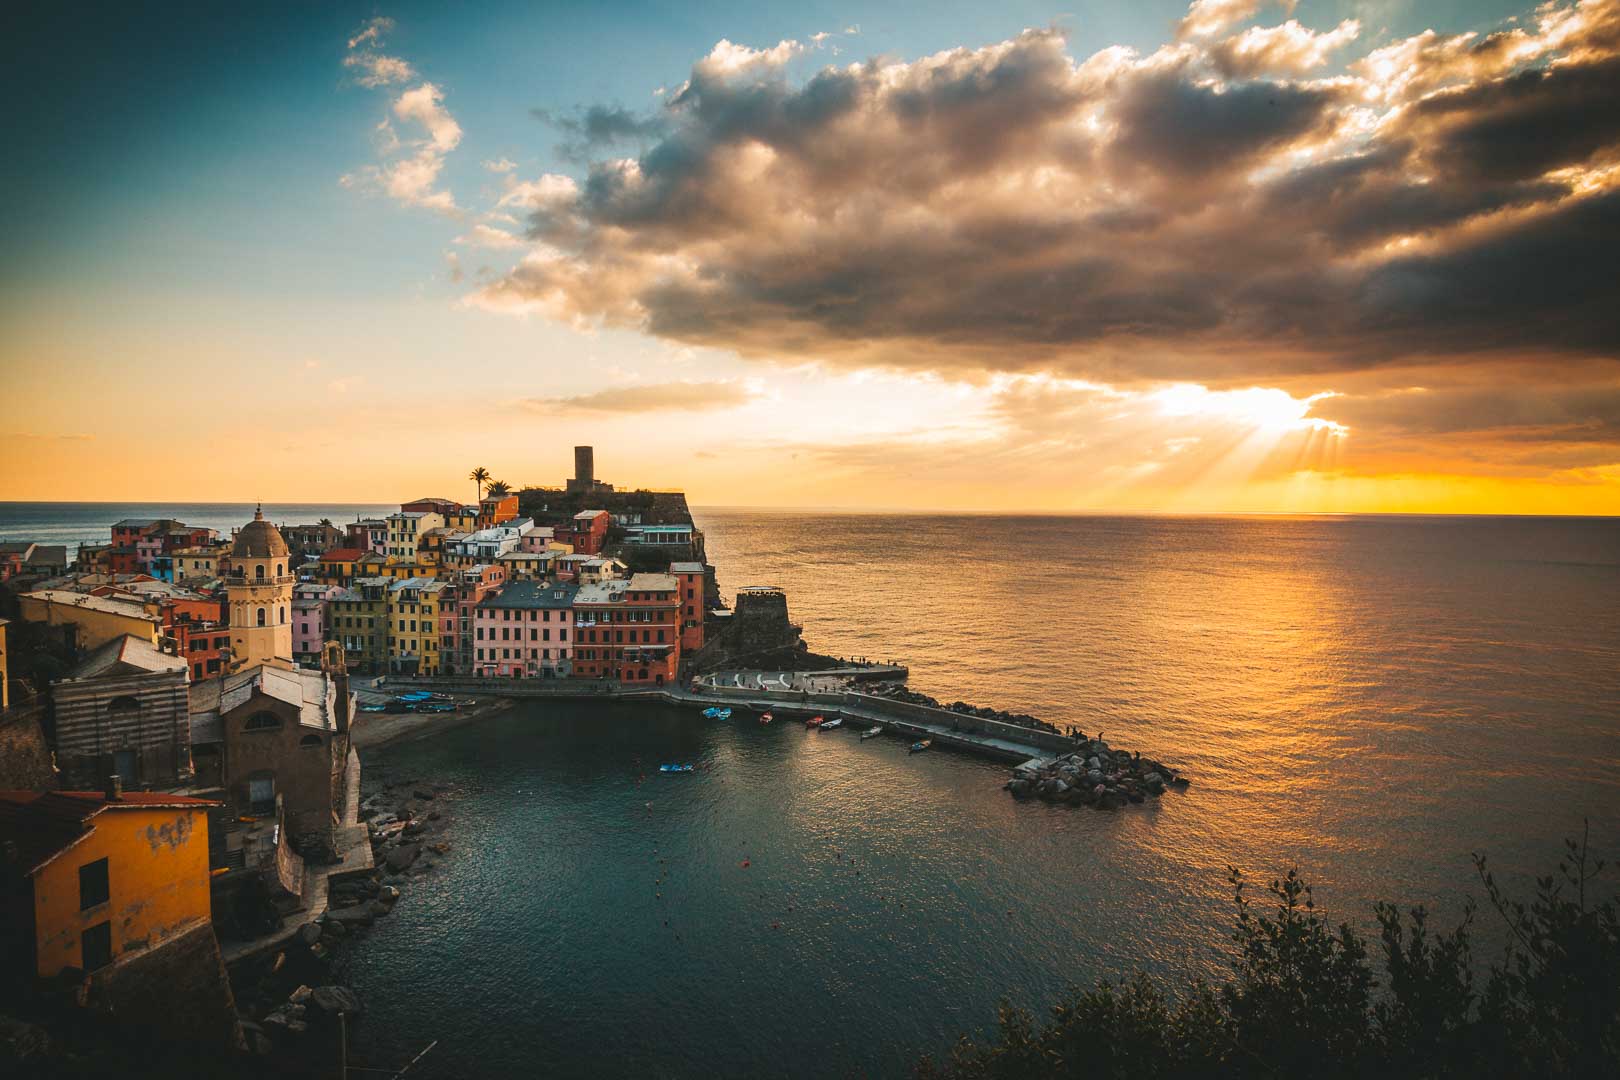 How to Get From Florence to Cinque Terre – The Best Options